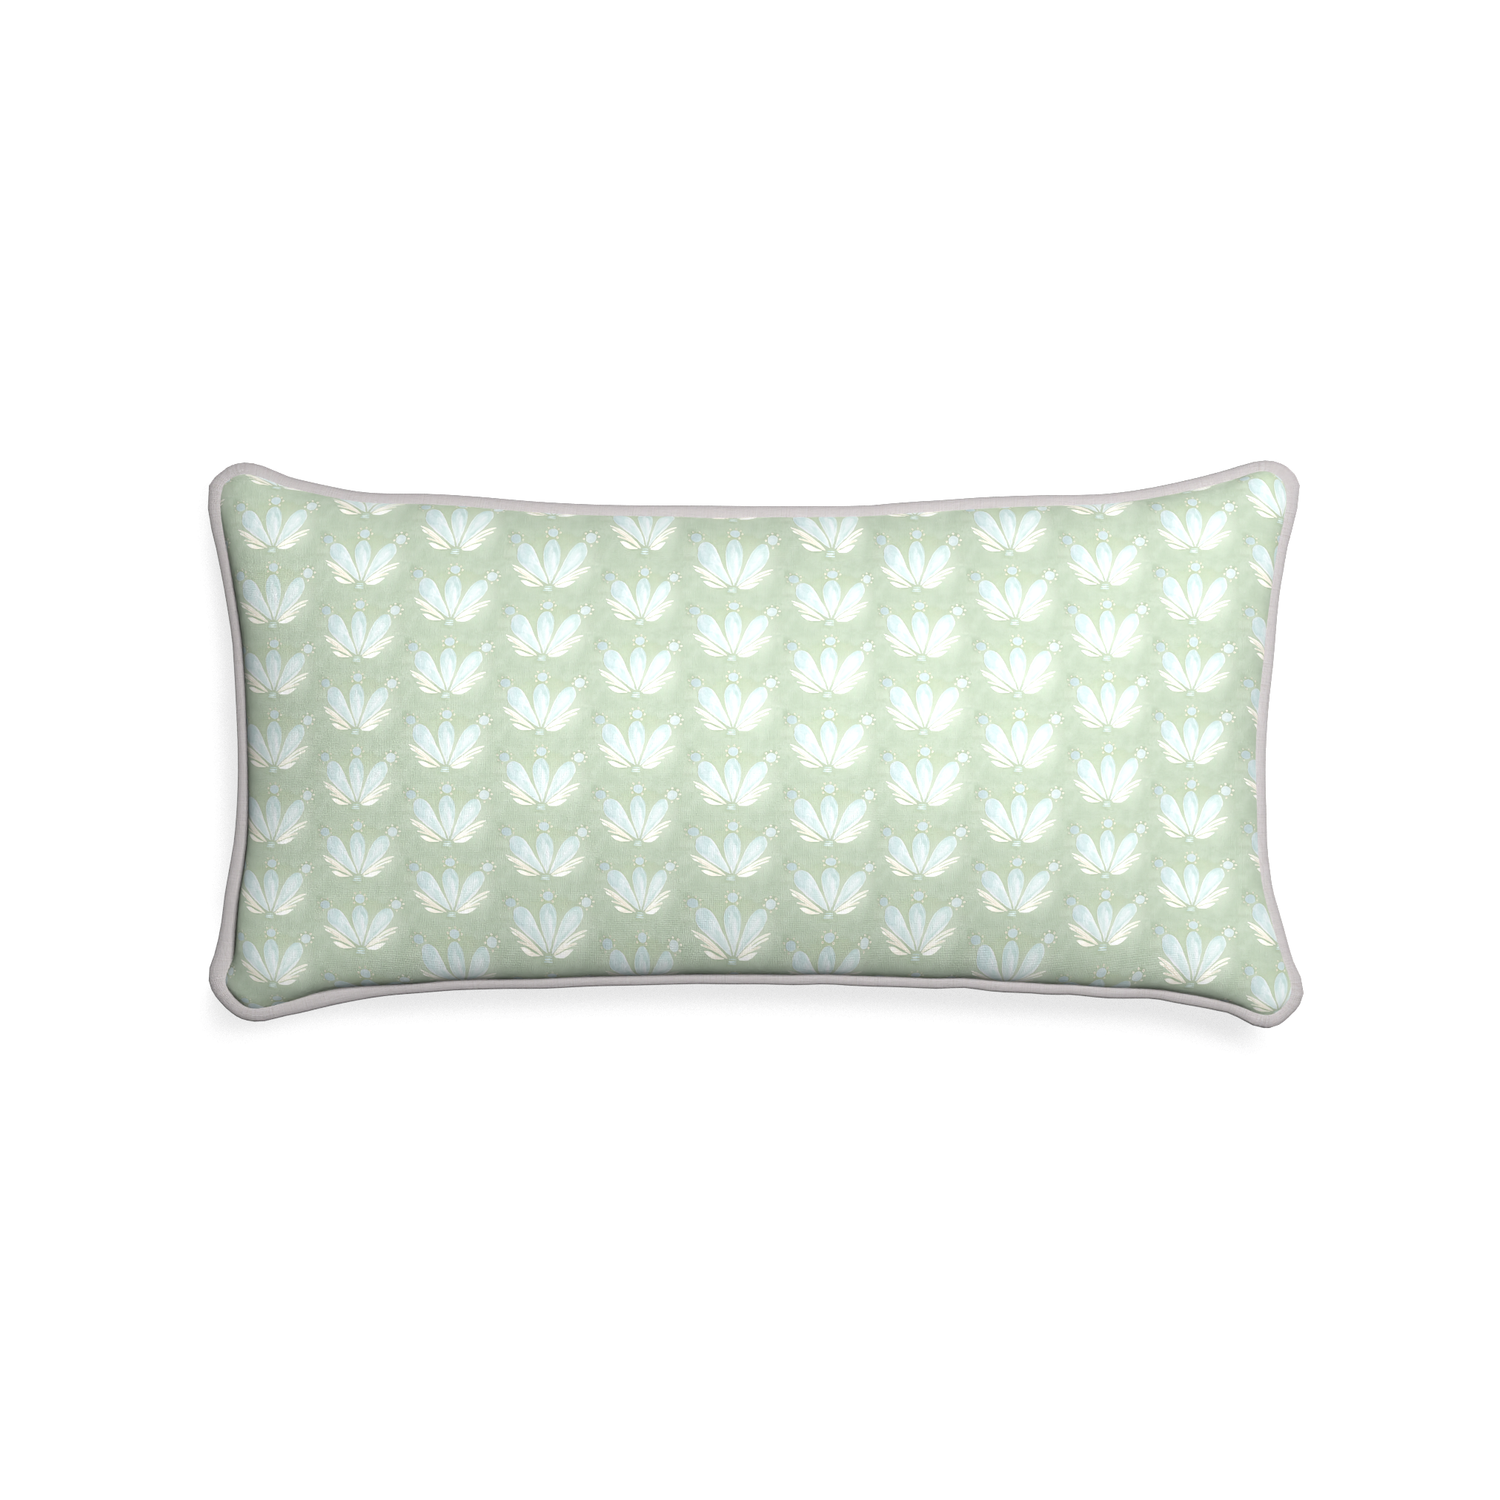 Midi-lumbar serena sea salt custom blue & green floral drop repeatpillow with pebble piping on white background